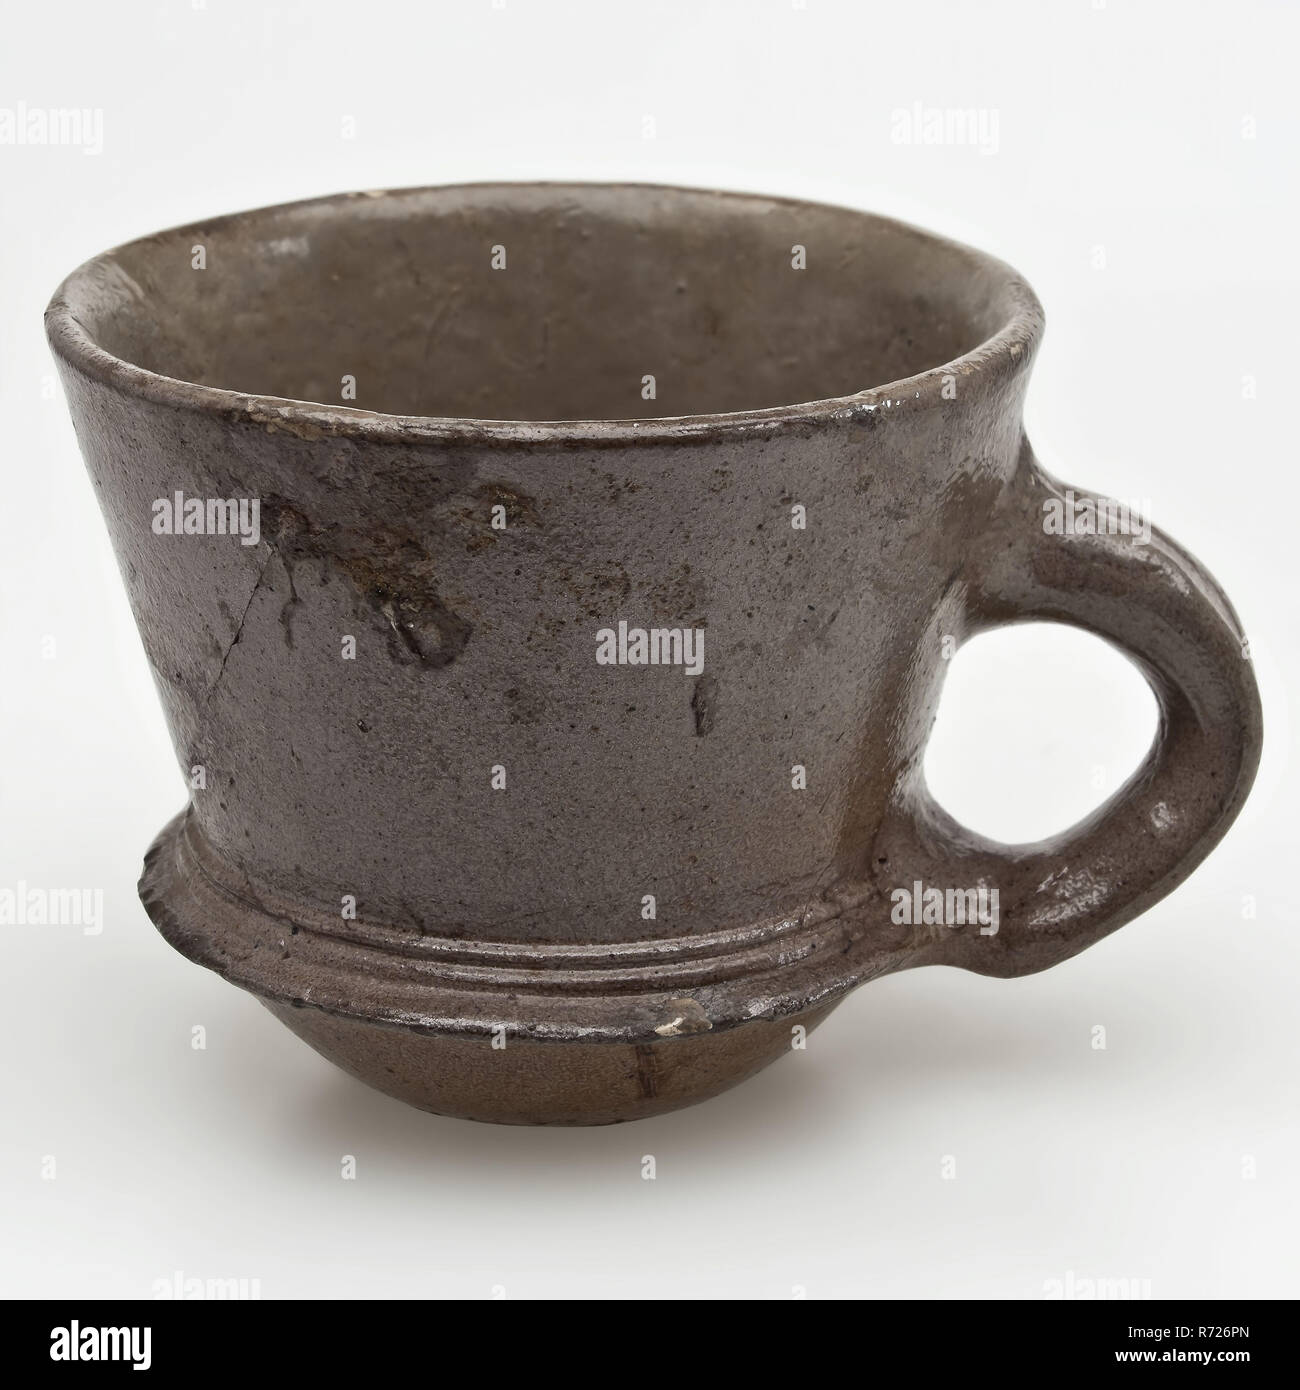 https://c8.alamy.com/comp/R726PN/stoneware-head-with-sloping-sidewall-and-collar-above-the-foot-ear-cup-cup-crockery-holder-soil-find-ceramic-stoneware-glaze-salt-glaze-hand-turned-set-glazed-baked-stoneware-cup-gray-brown-glaze-protruding-edge-under-the-ear-cup-on-small-stand-tapered-with-collar-above-the-foot-low-attached-ear-crooked-archeology-valckensteyn-poortugaal-albrandswaard-indigenous-pottery-import-beverage-crockery-drinking-water-soil-discovery-castle-valckensteyn-in-poortugaal-now-albrandswaard-1961-1962-R726PN.jpg